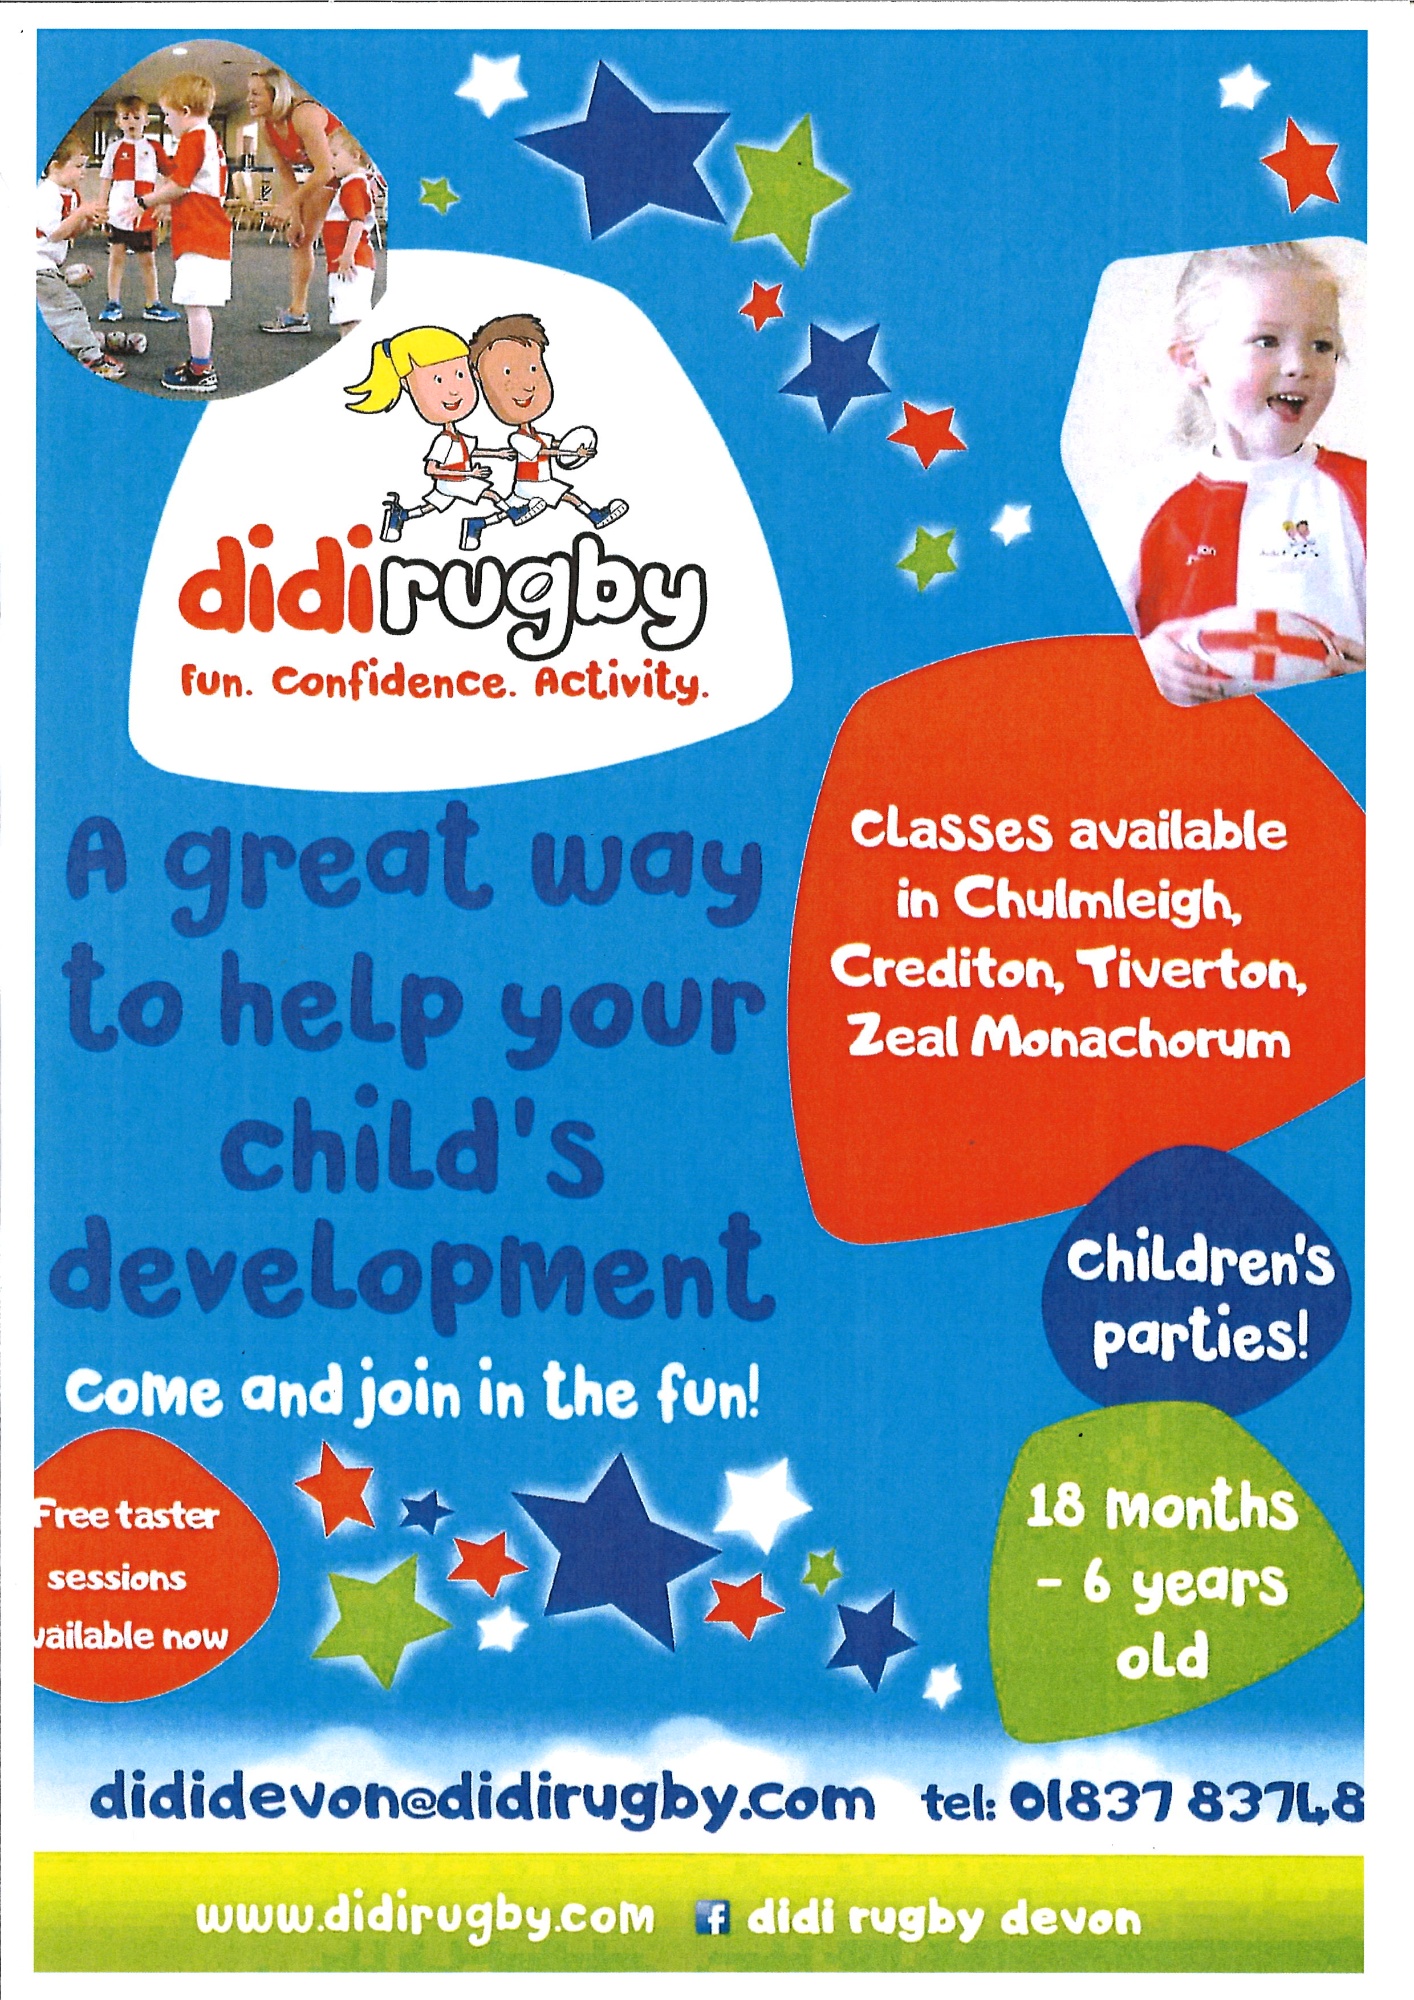 Didi Rugby. A great way to help your child's development. Class available in Chulmleigh, Crediton, Tiverton, Zeal Monachorum. 01837 83748